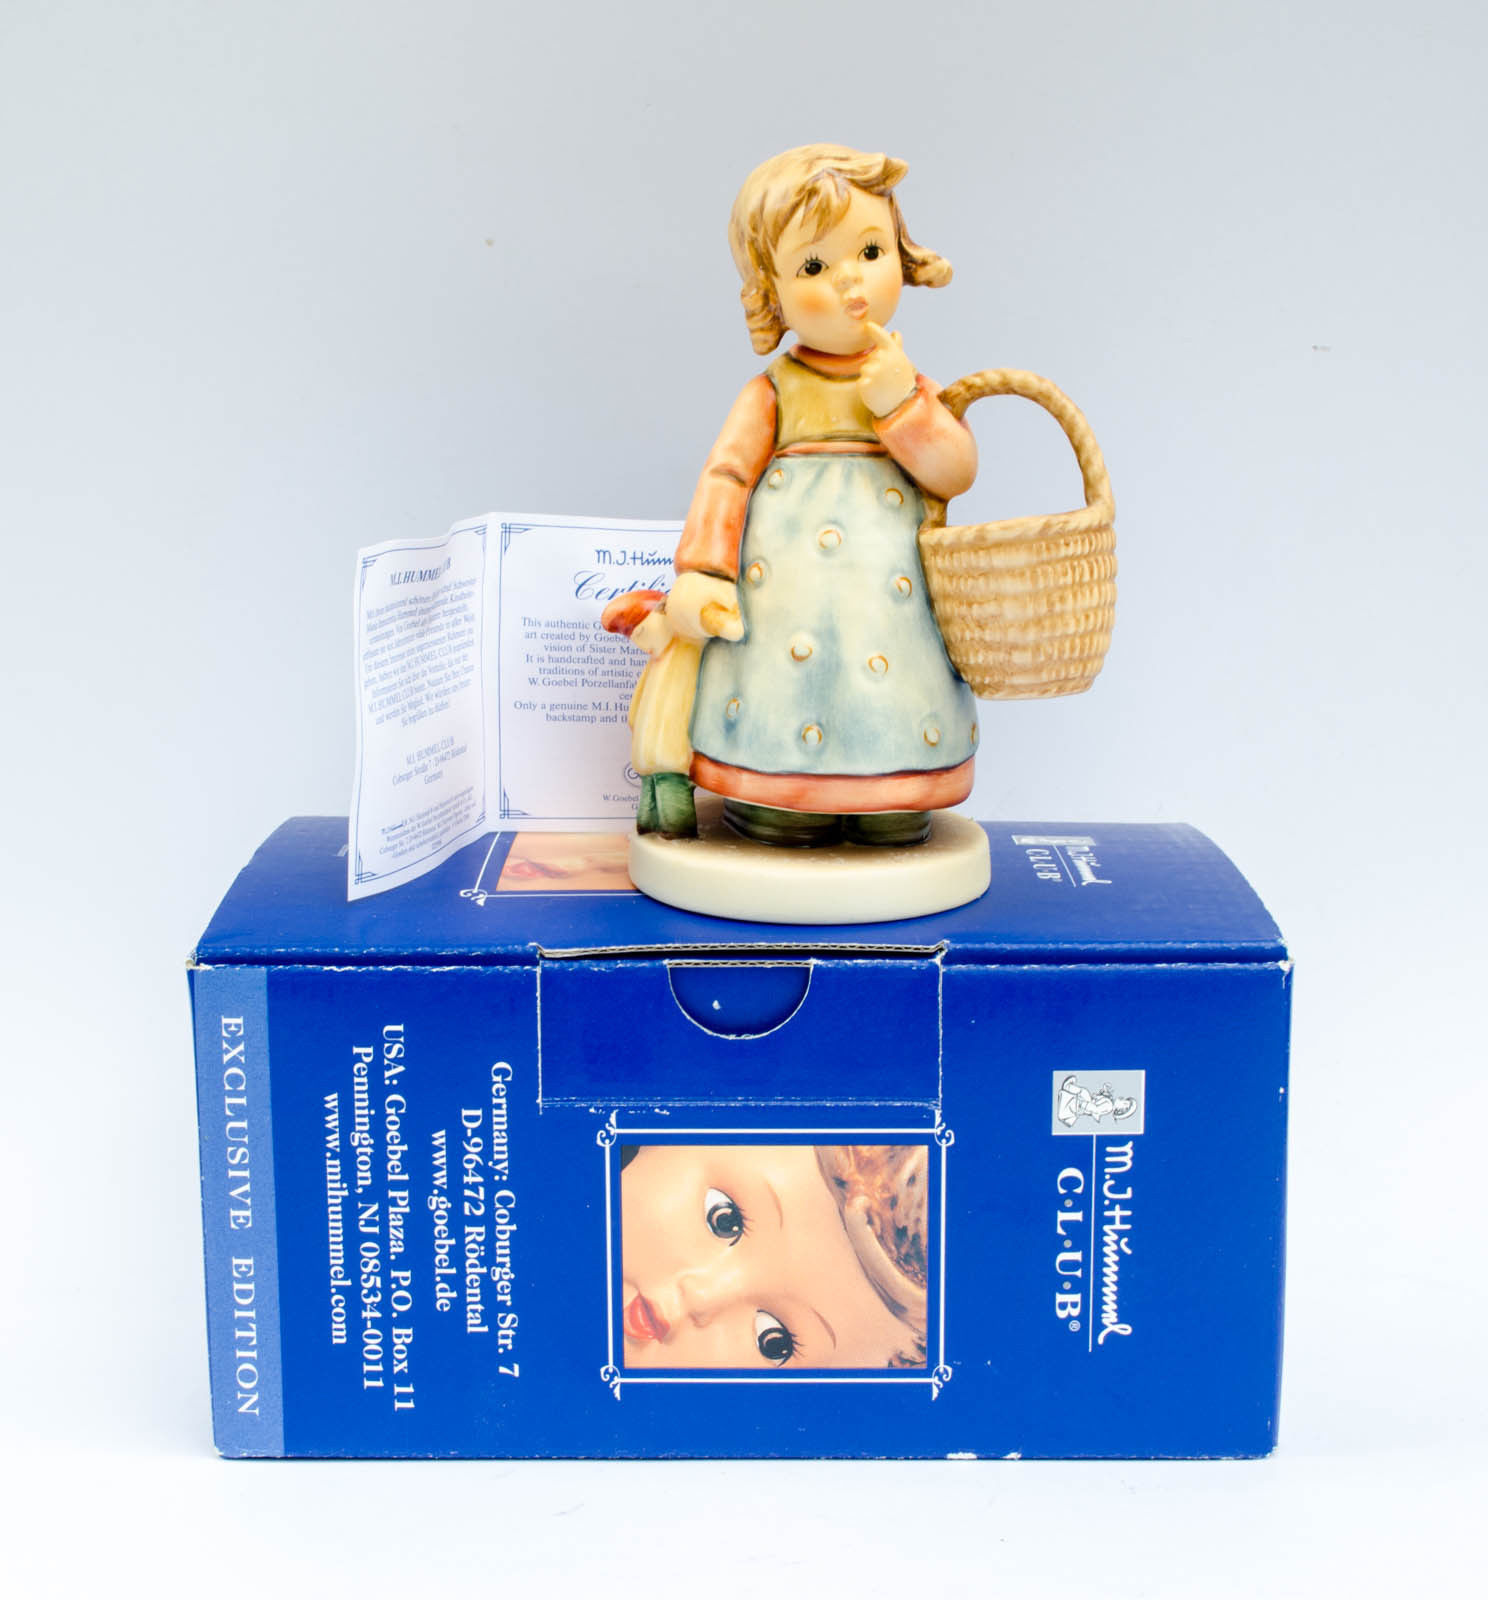 Rare New In Box Exclusive Hummel Club "Forget Me Not" #362 Figurine Girl -- Price Guide Details